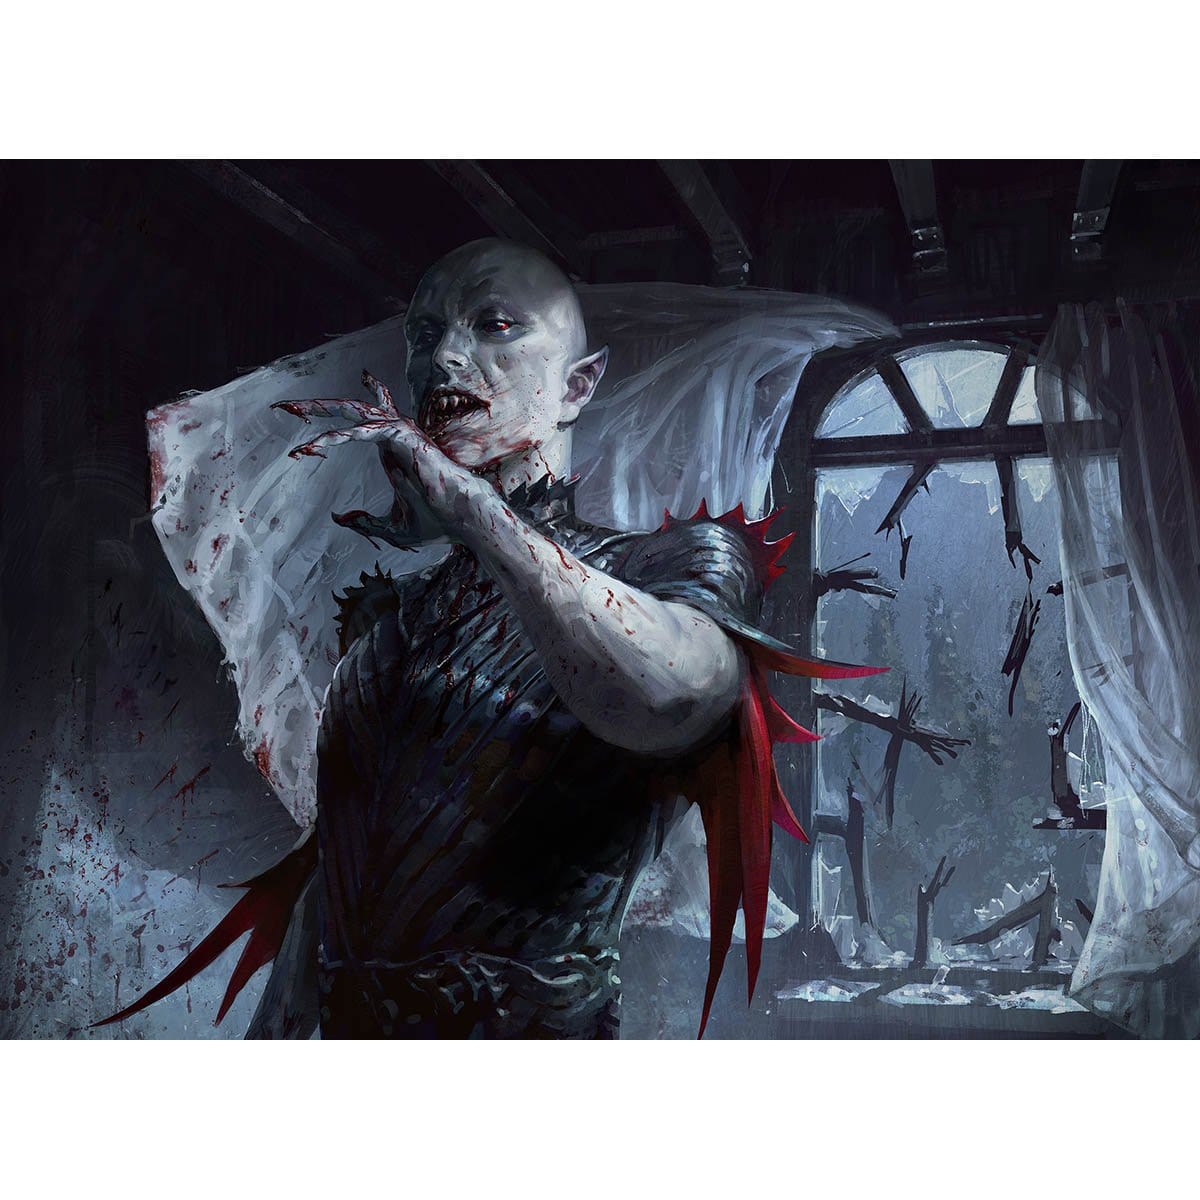 Blood Burglar Print - Print - Original Magic Art - Accessories for Magic the Gathering and other card games